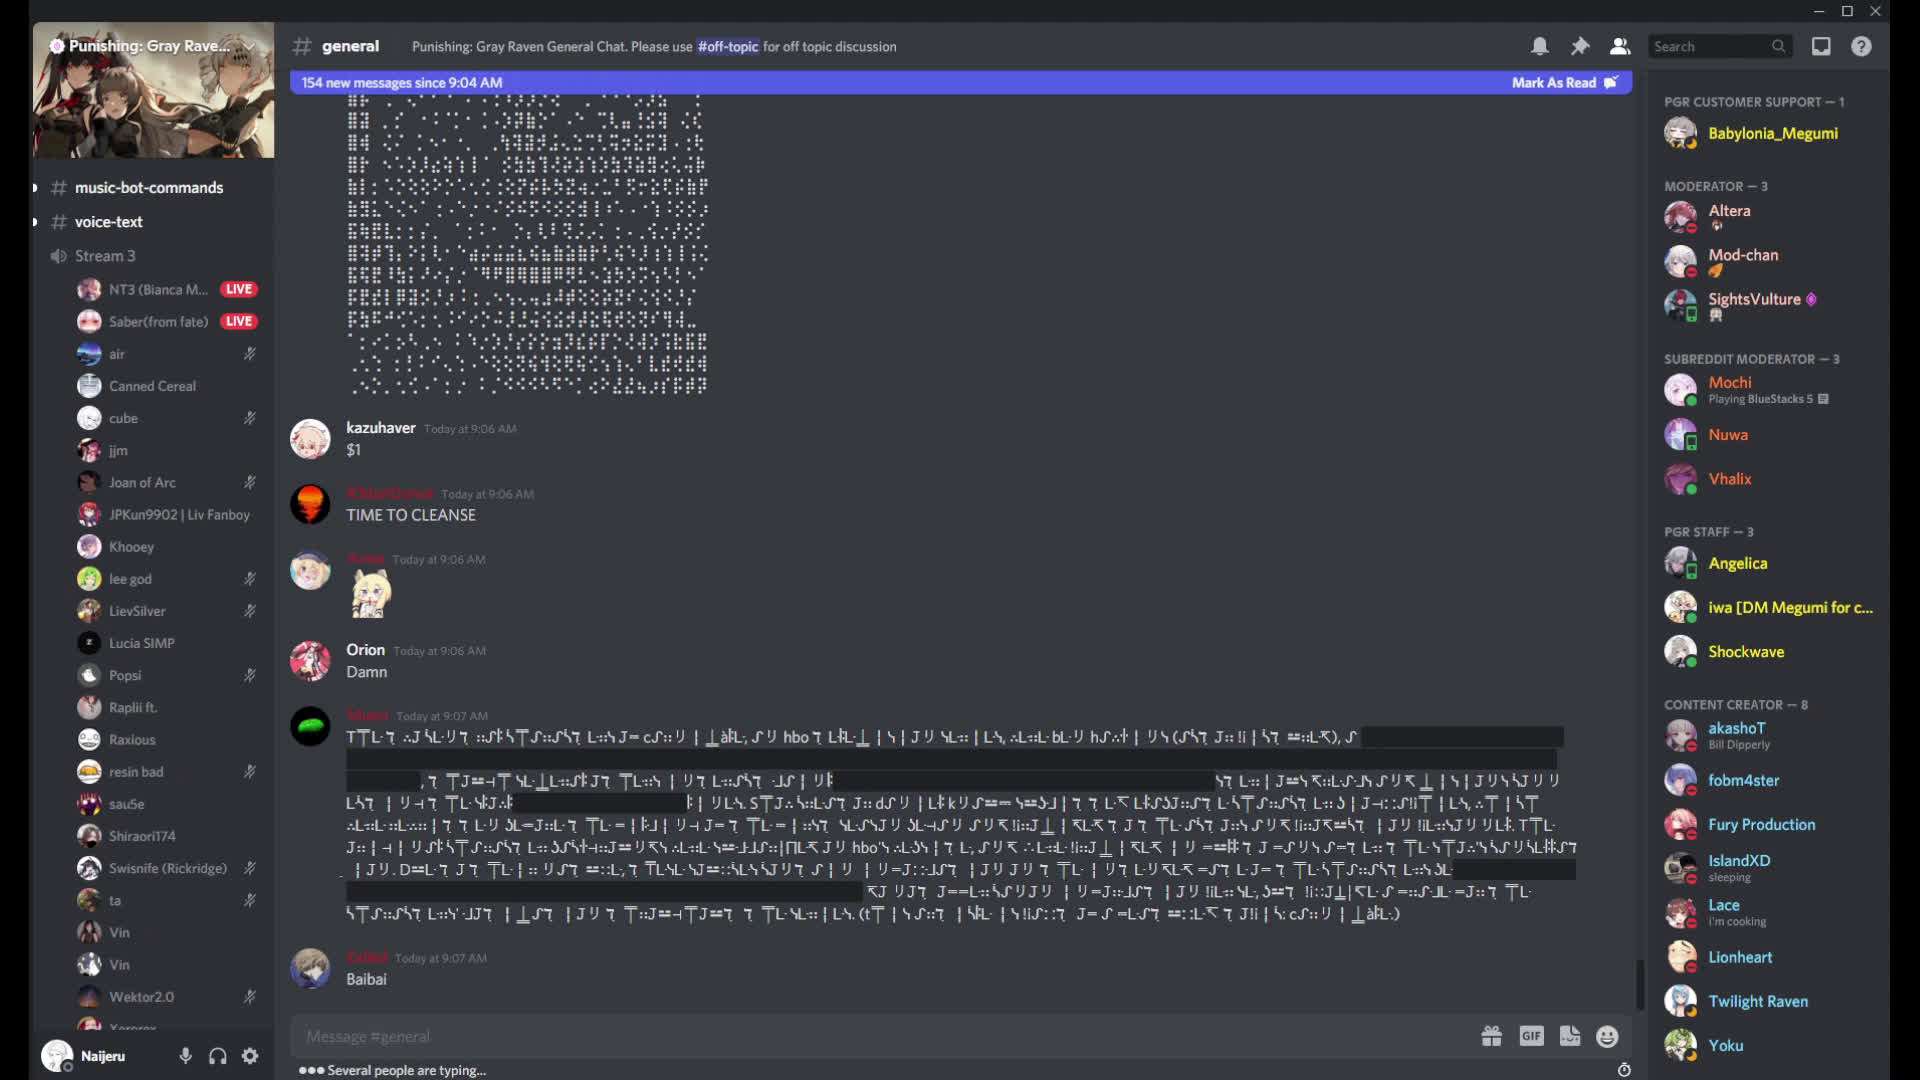 The final minutes of the Punishing Gray Raven Discord server